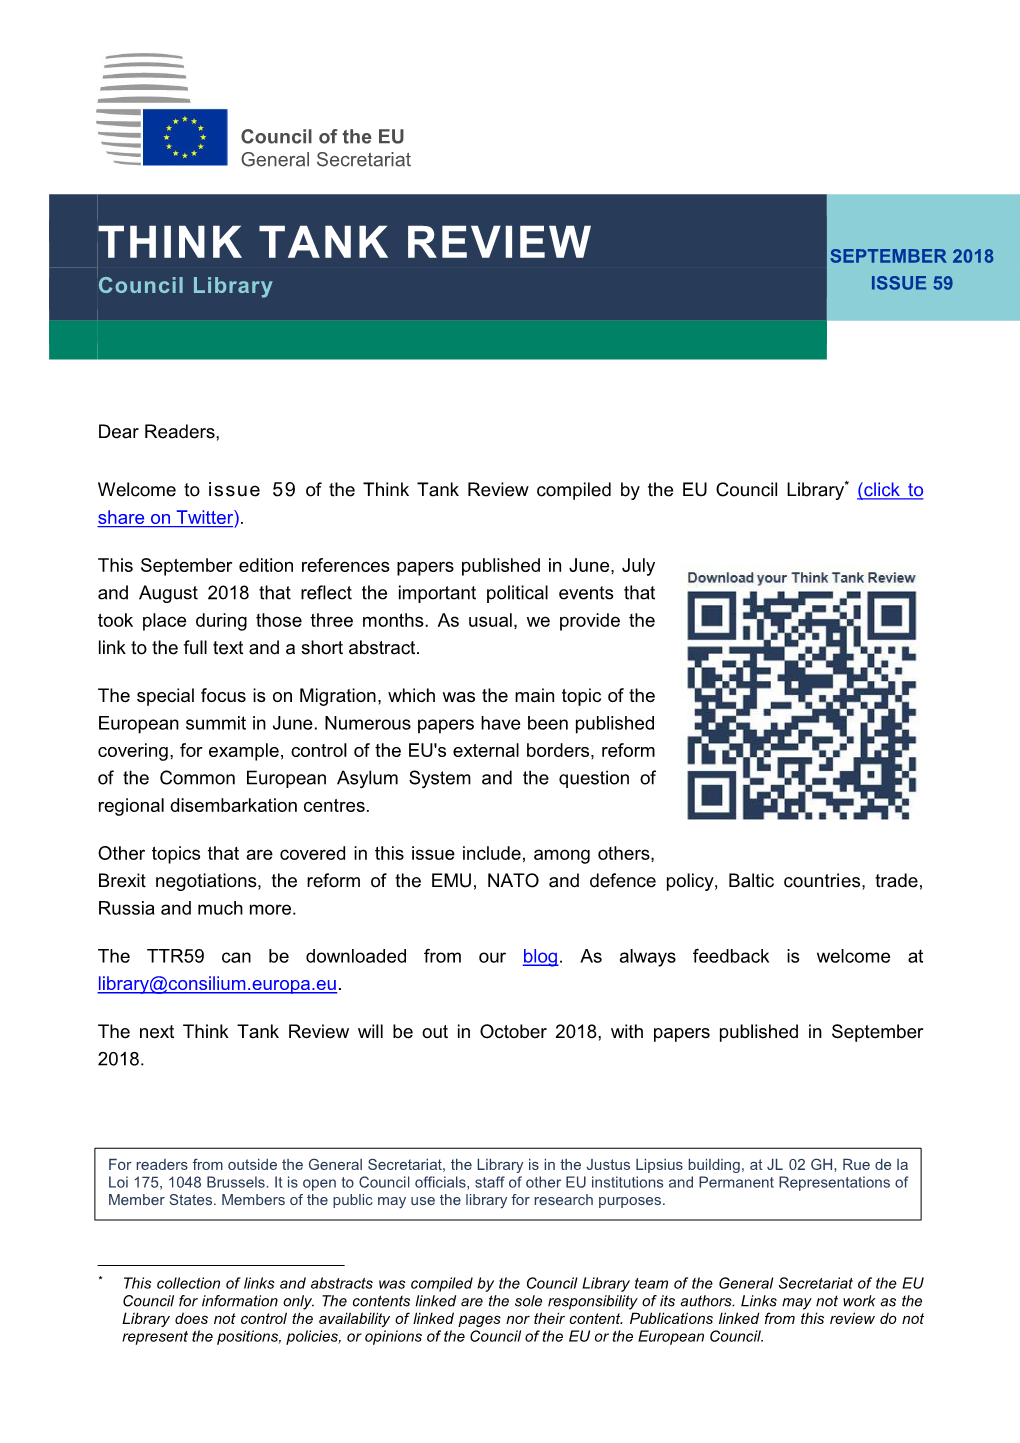 THINK TANK REVIEW SEPTEMBER 2018 Council Library ISSUE 59